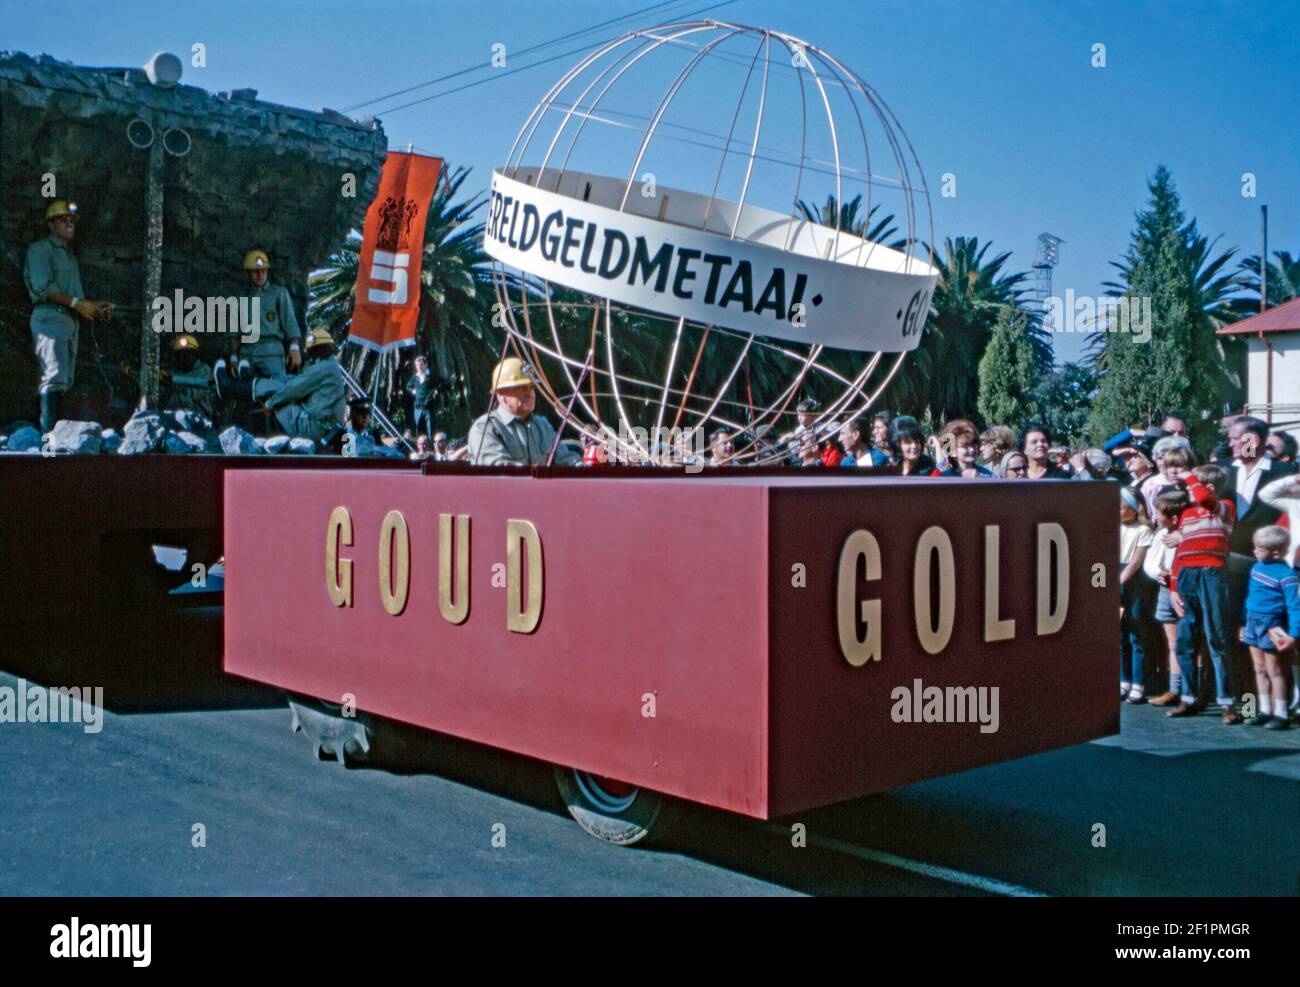 Parade float promoting South African gold mining (goud in Afrikaans), during the apartheid era, Durban, South Africa, 1966.  The tractor is pulling a trailer with gold-miners on it ‘drilling’ for the precious metal. It’s very much a white audience viewing this event. This image is from an old amateur 35mm Kodak colour transparency. Stock Photo